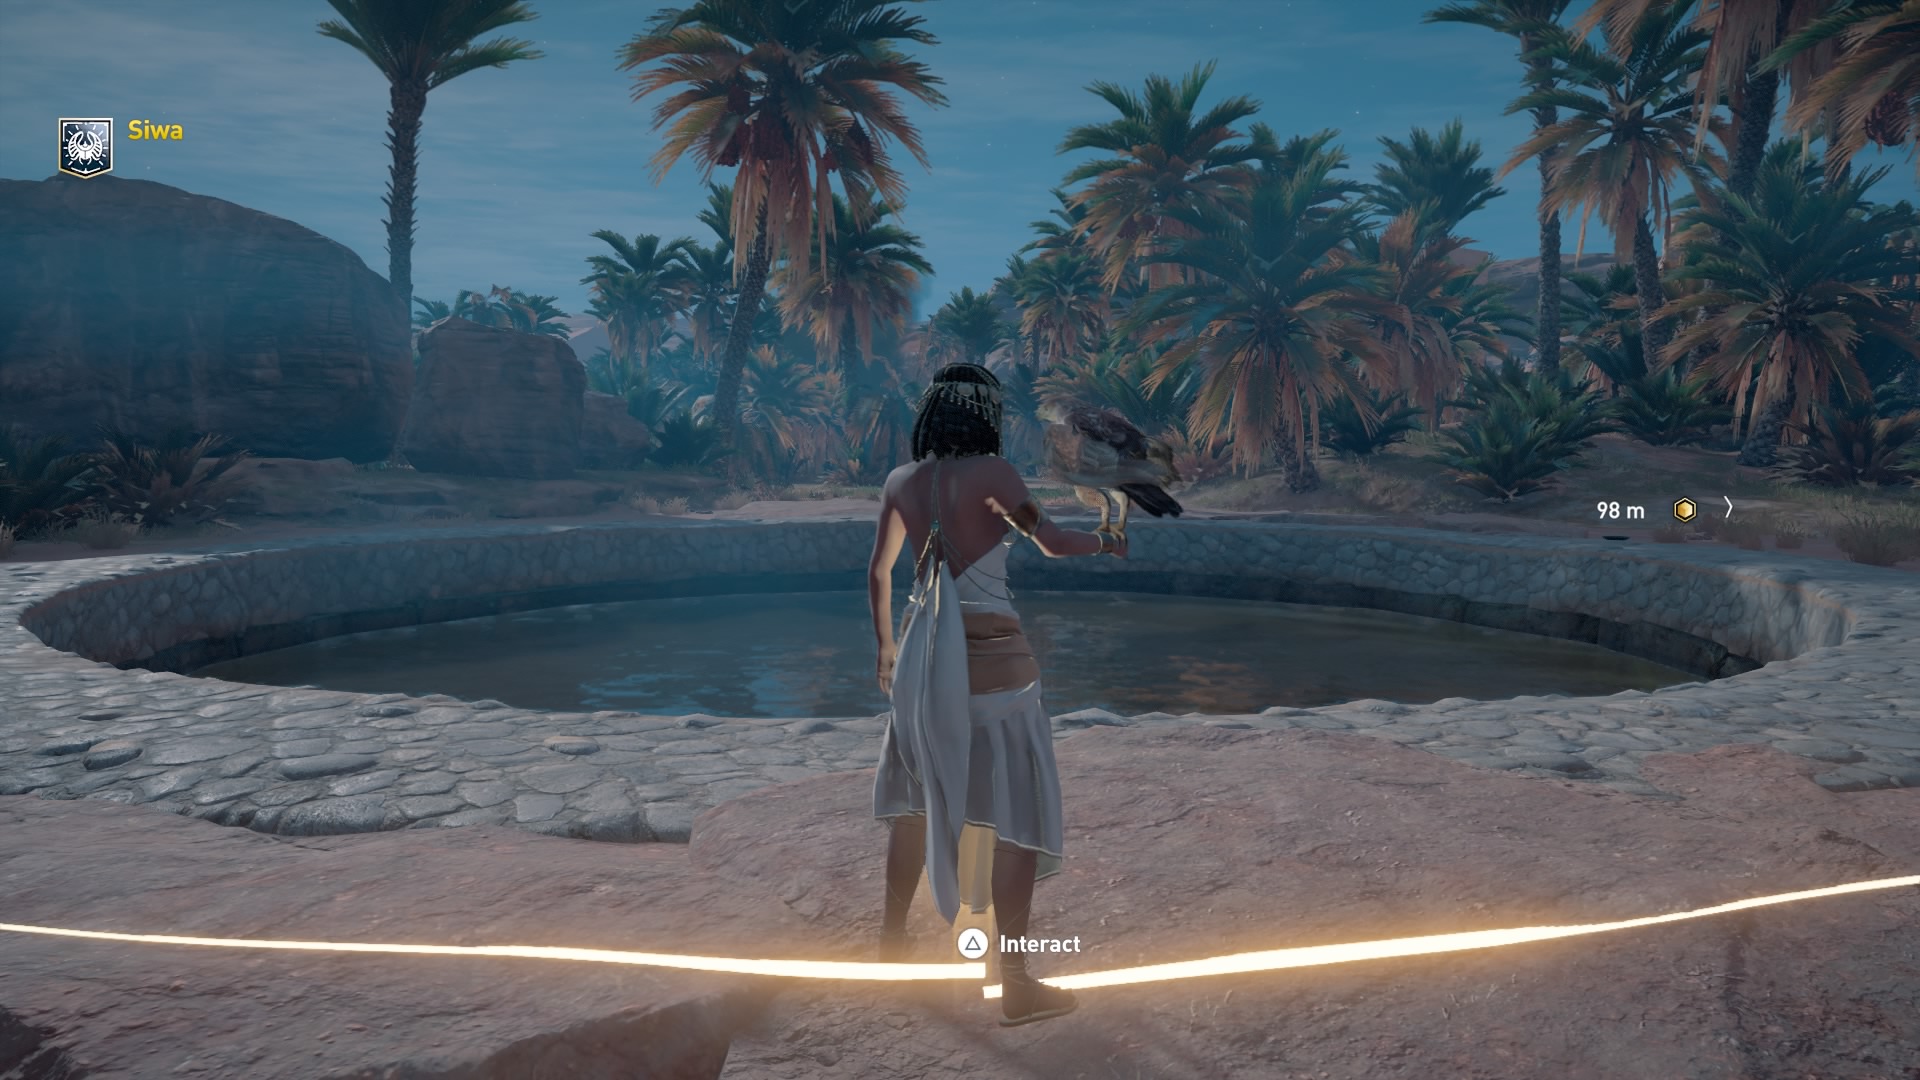 In the Discovery Tour mode for Assassin’s Creed Origins, Cleopatra stands in front of a reflecting pool in Siwa where the real-life Cleopatra used to bathe.